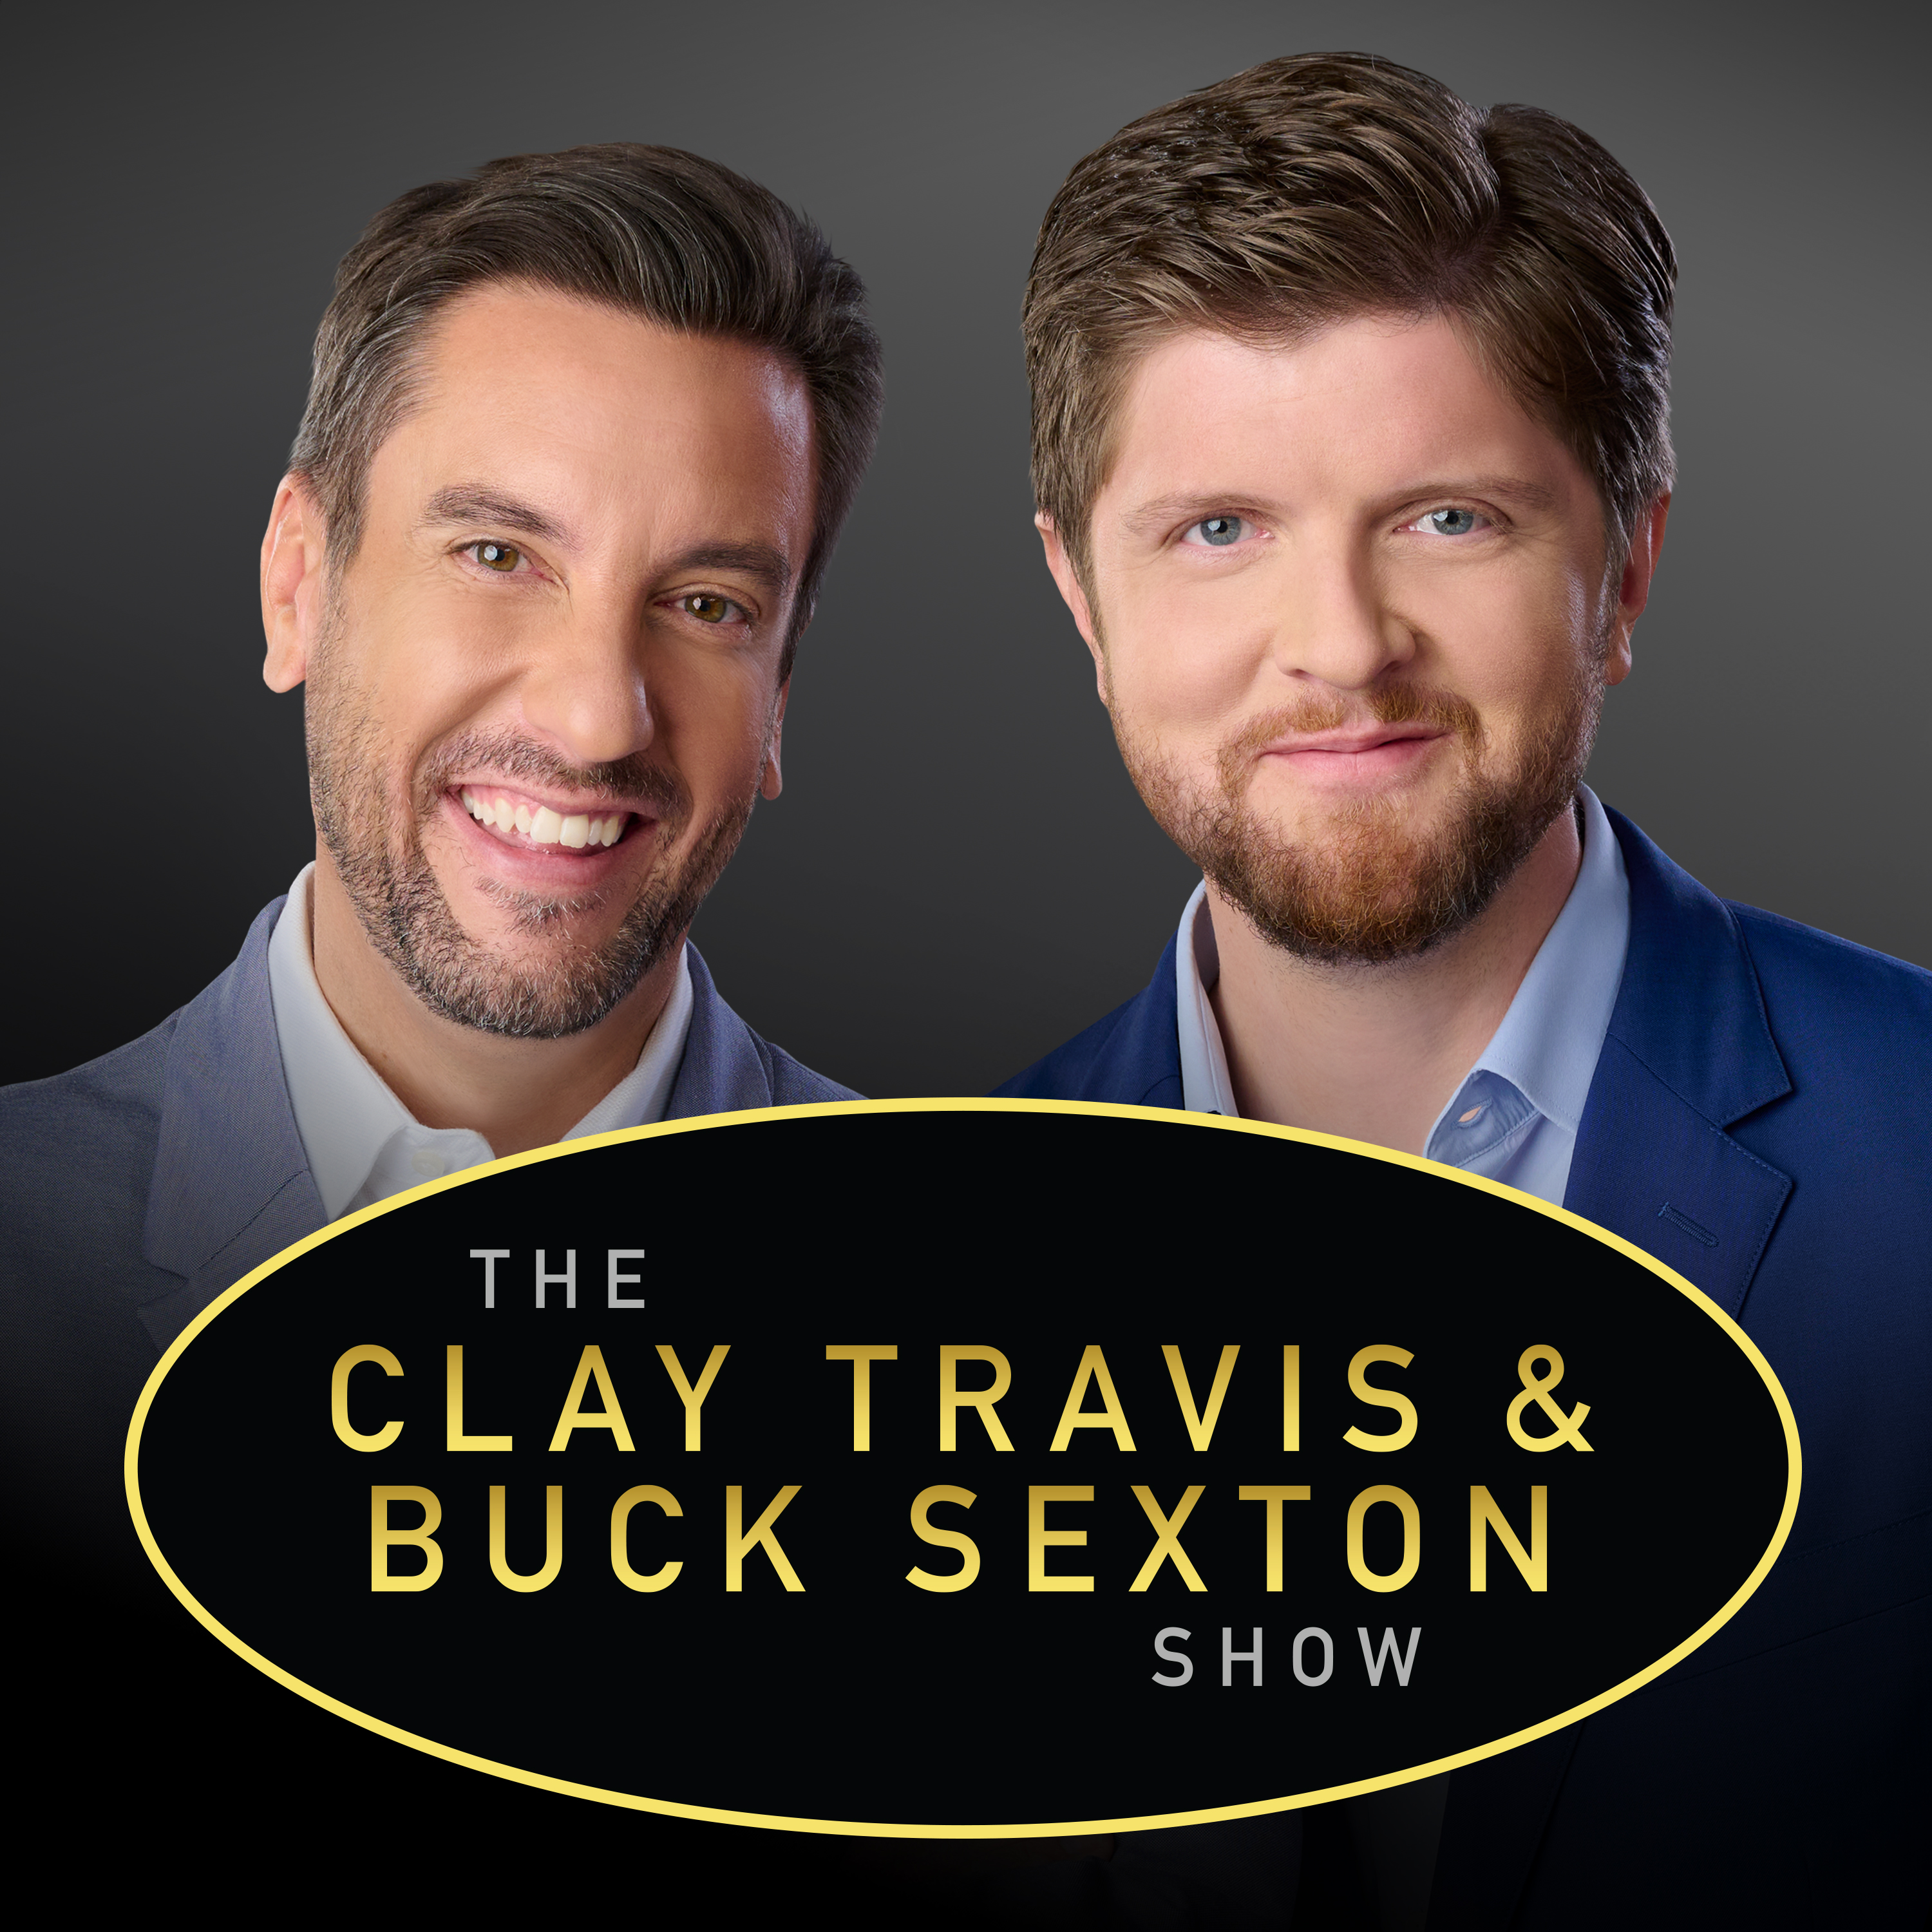 Clay Travis and Buck Sexton Show H2 – Sep 13 2022